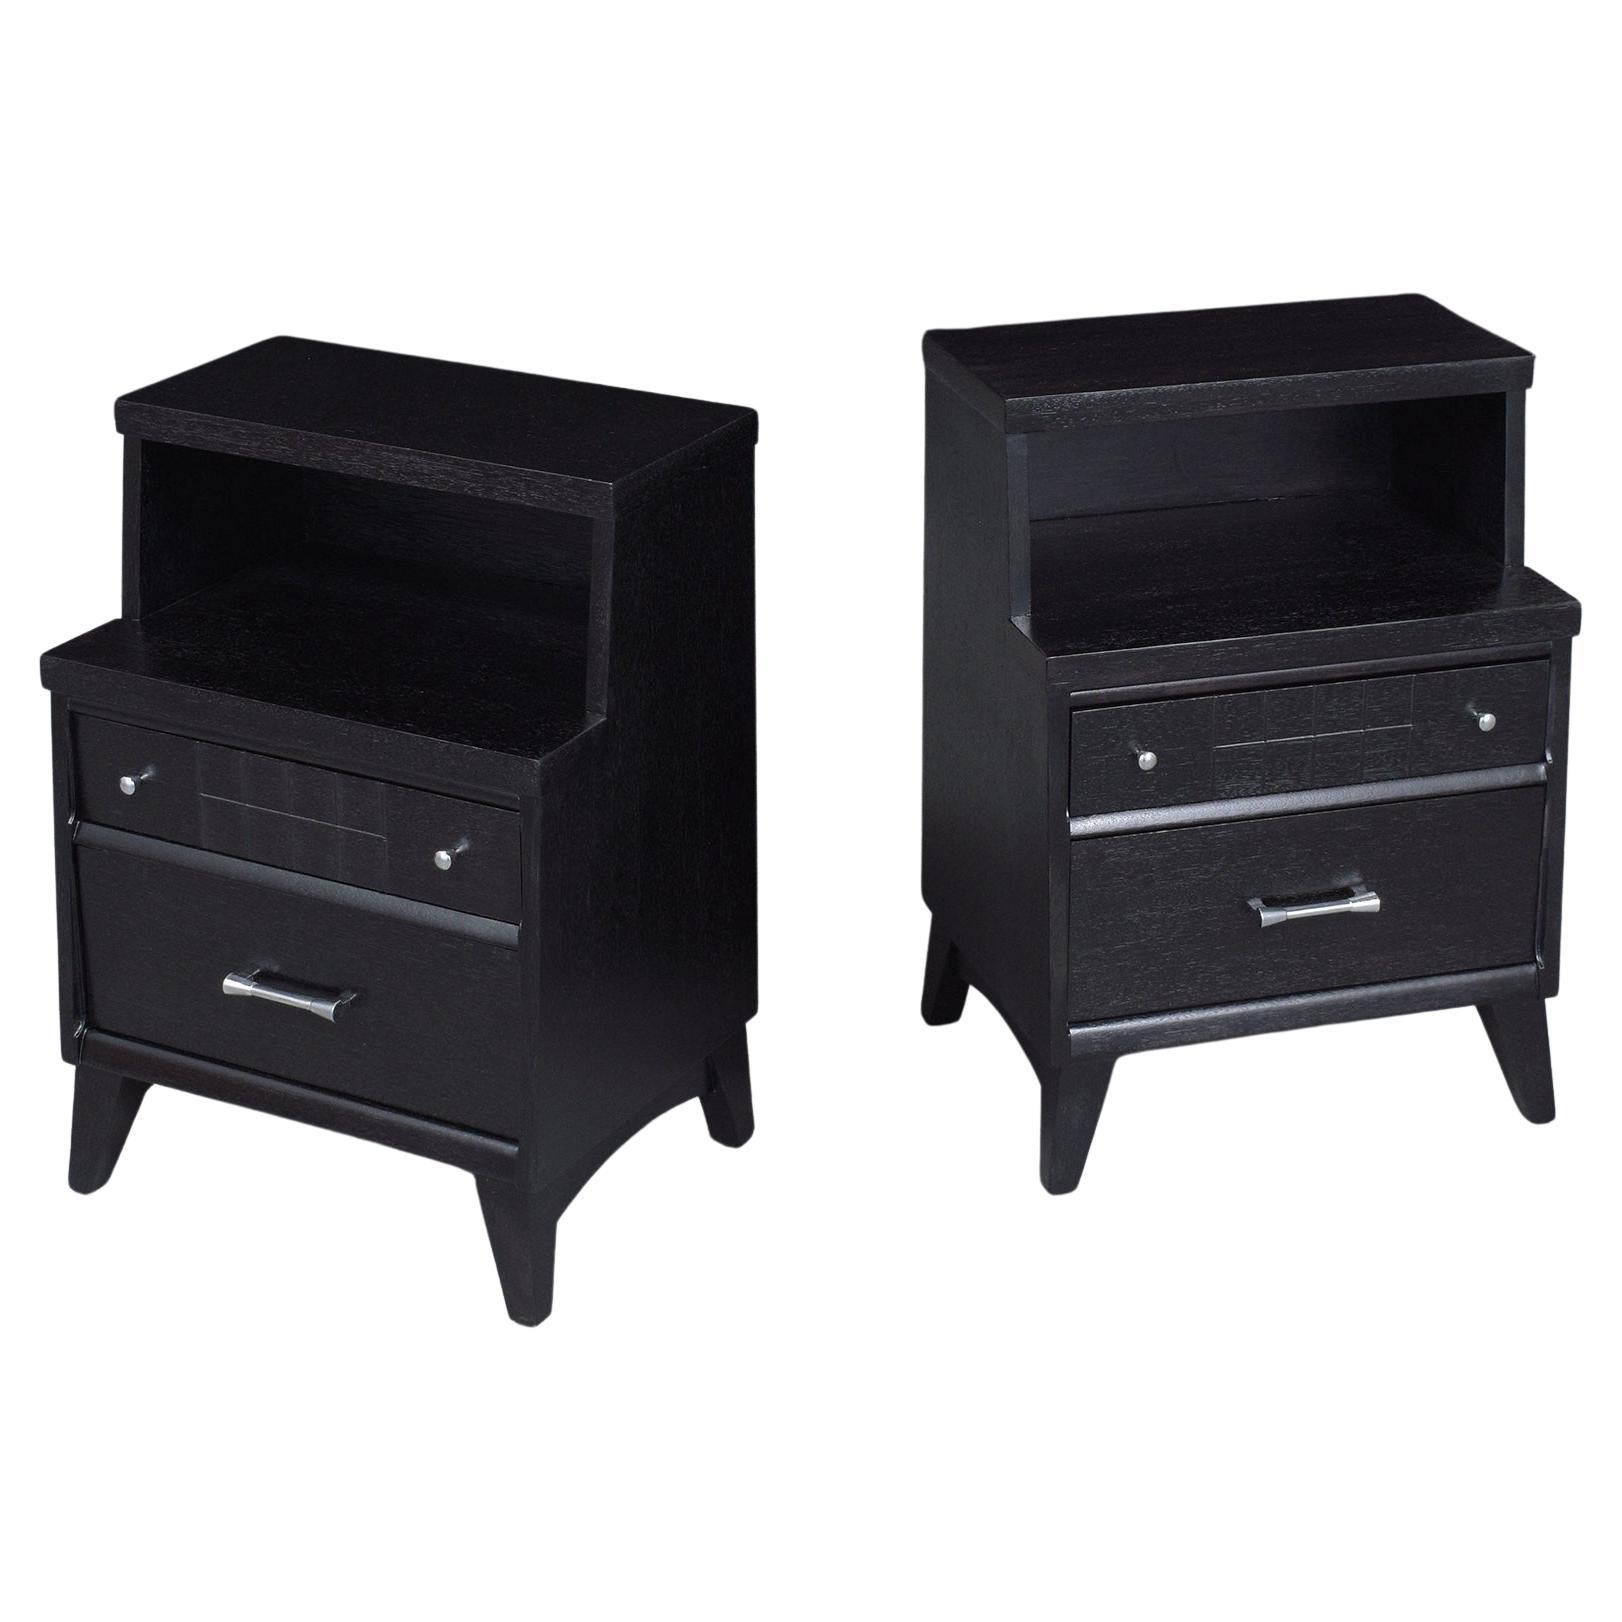 Restored Mid-Century Modern Nightstands with Ebonized Finish and Chrome Hardware For Sale